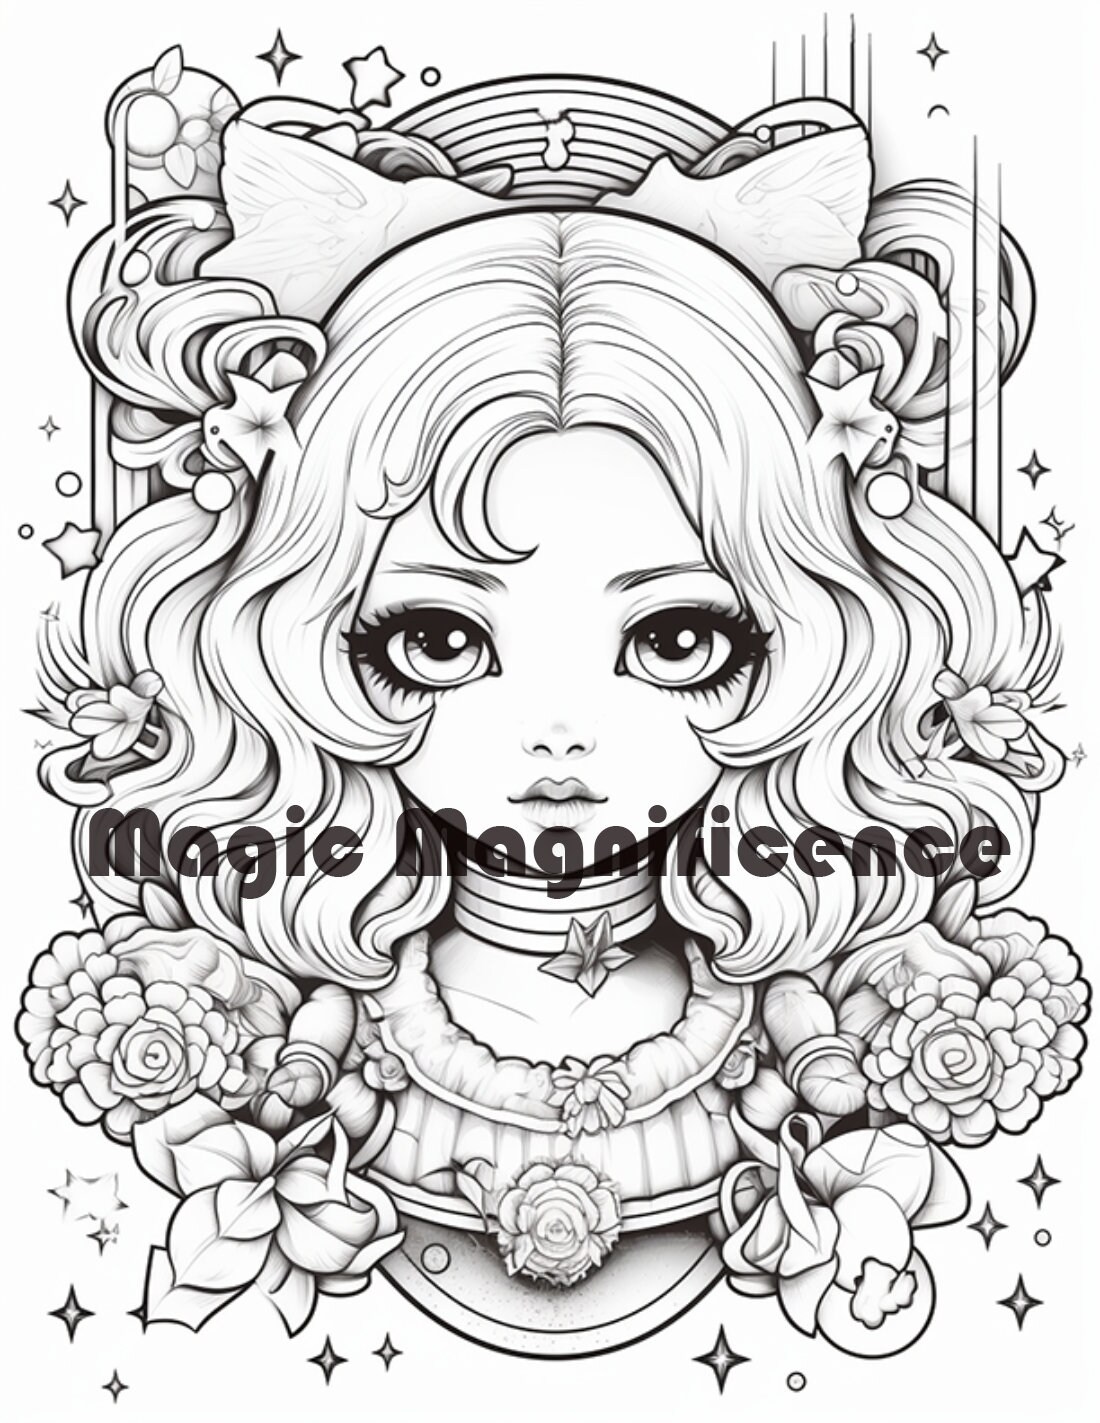 101 Kawaii Anime Girls Coloring Book: Pretty Anime Characters in Varieties of Fashion Style for Adults and Teens . Easy Coloring Pages for Stress